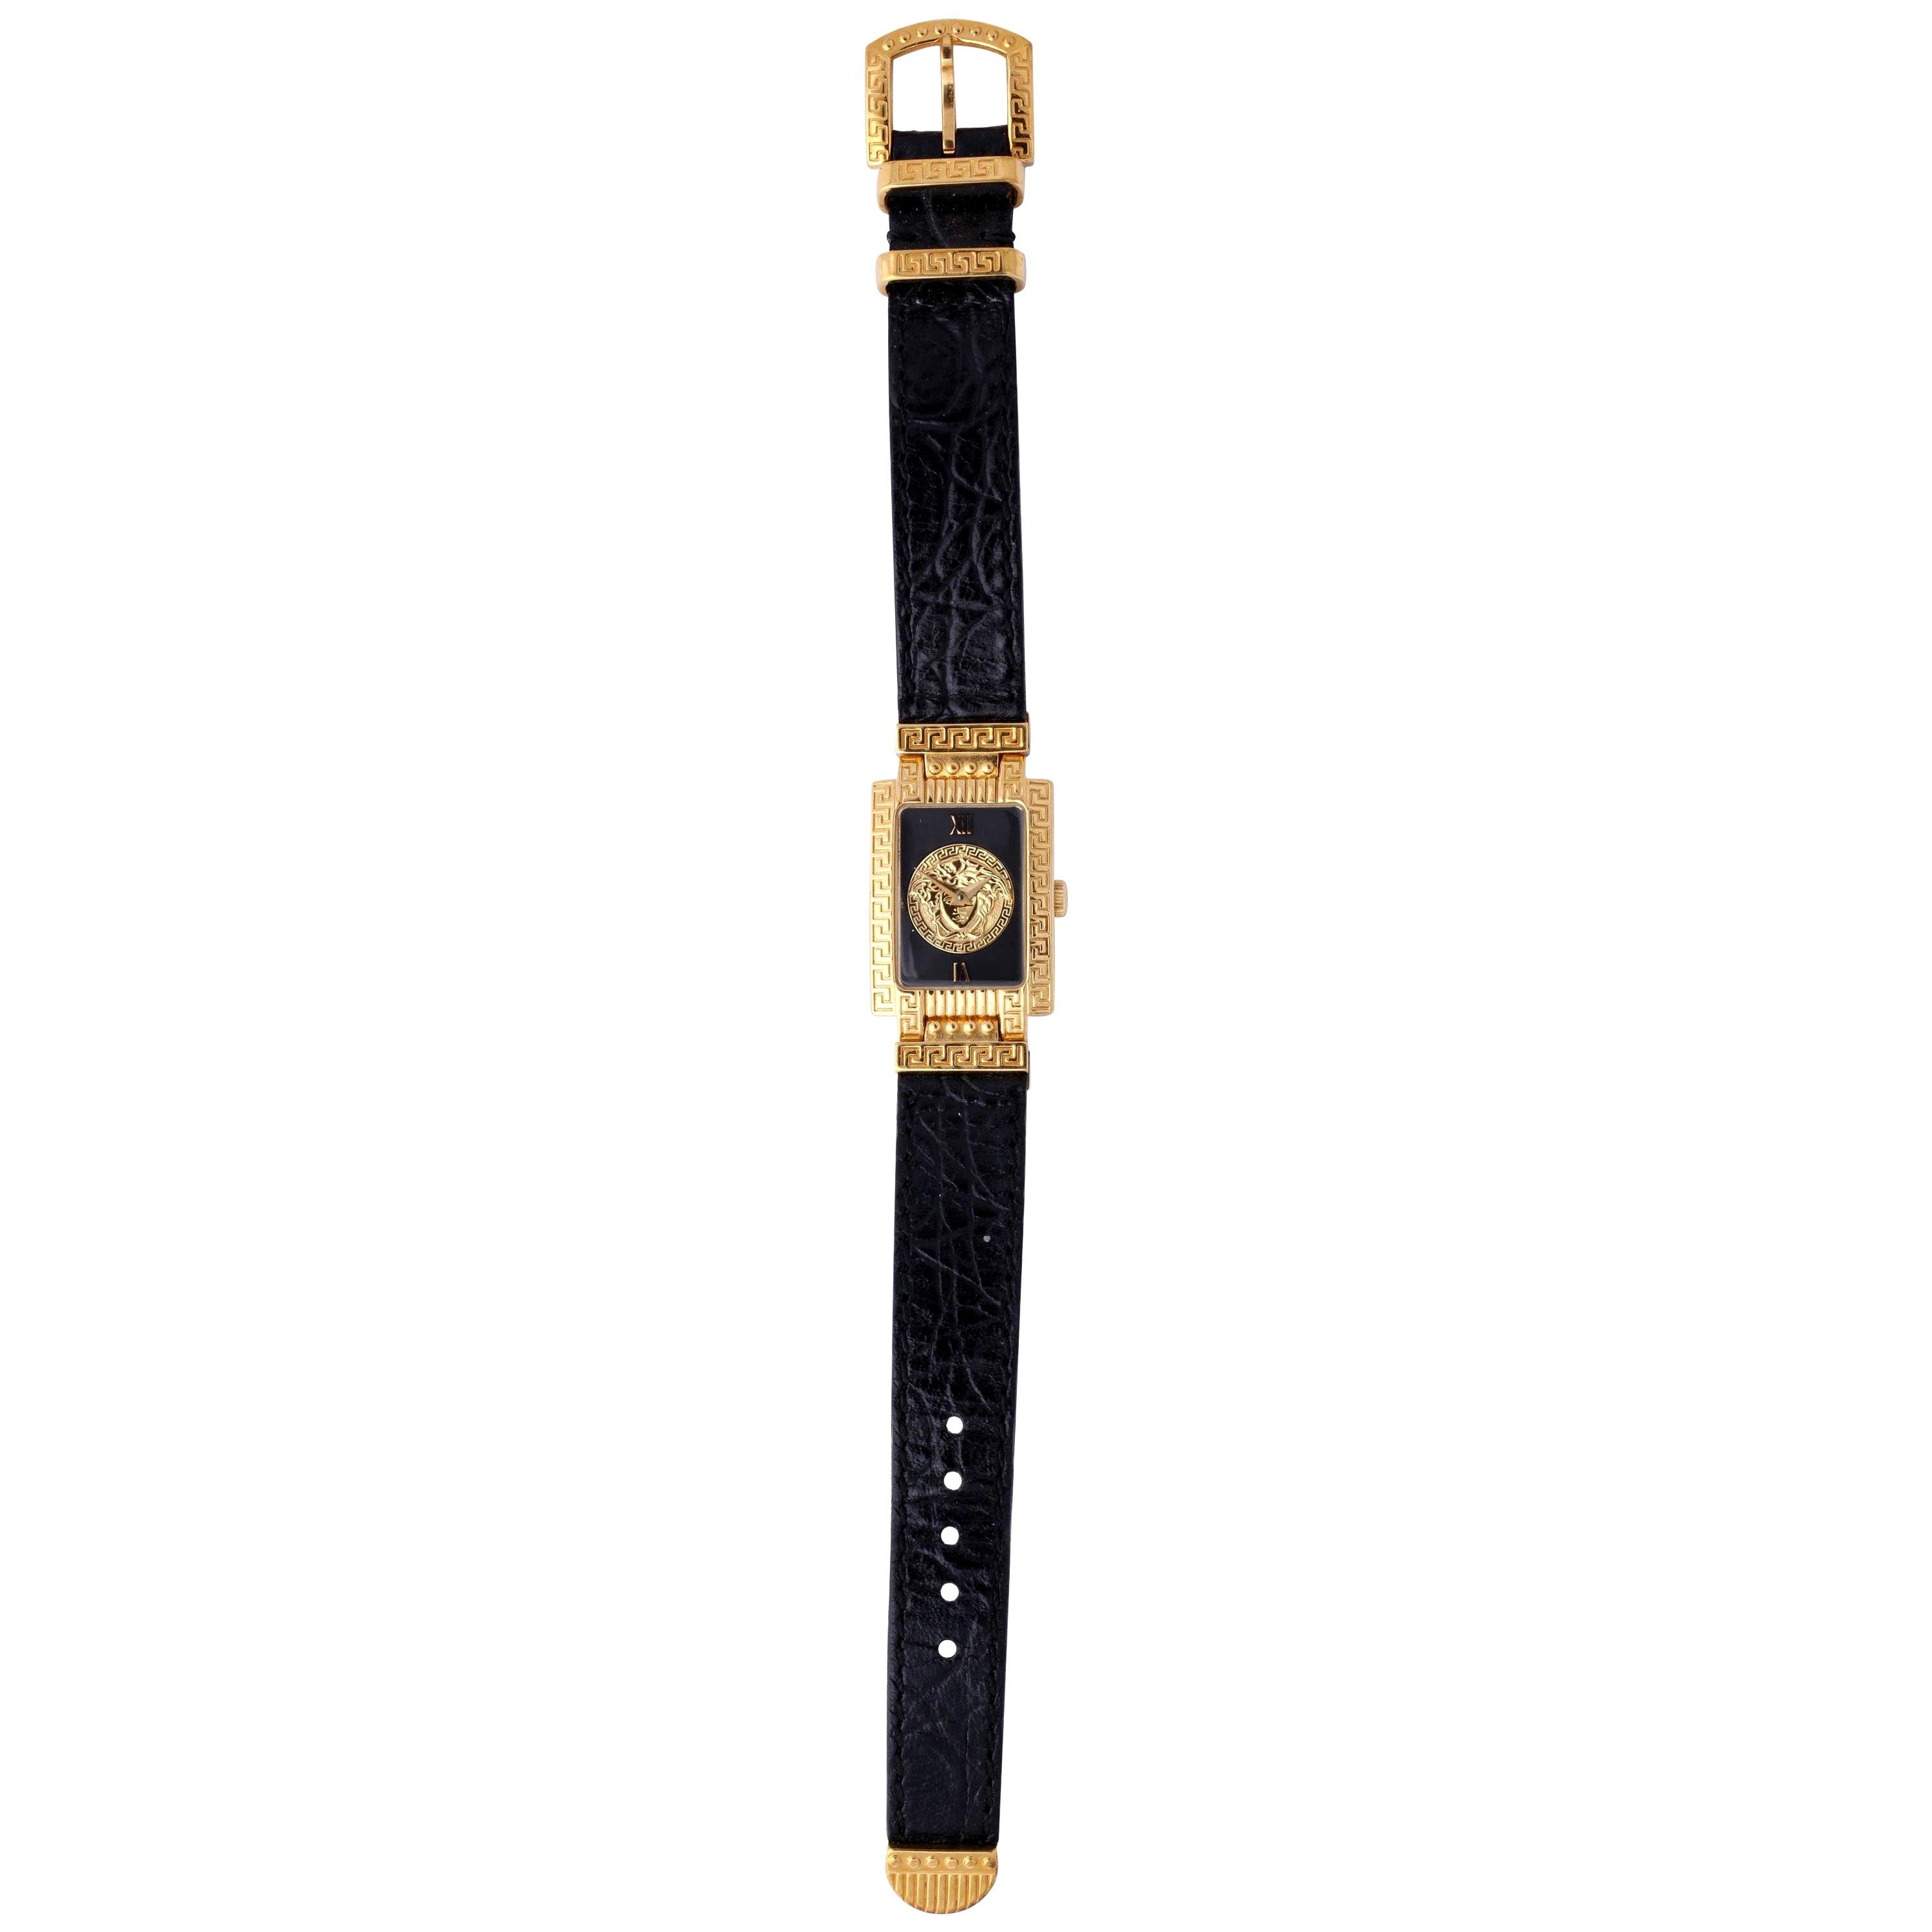   Gianni Versace Medusa Watch with Black Belt  For Sale